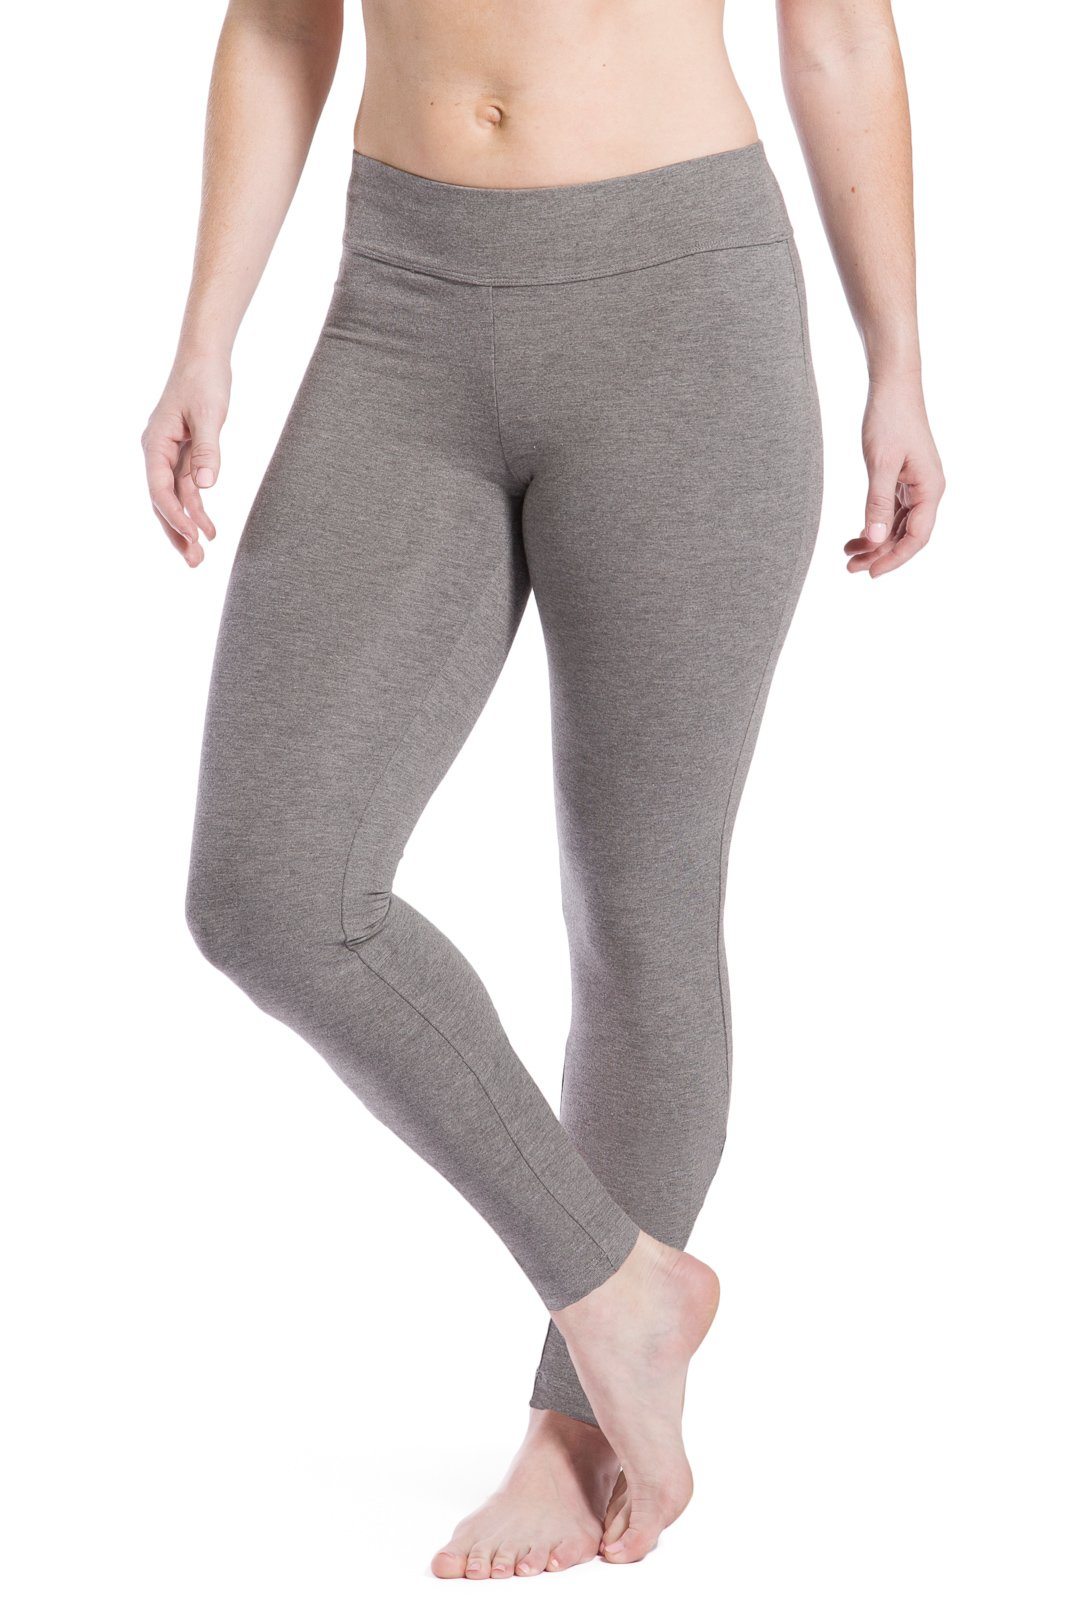 ANKLE LENGTH LEGGINGS / 4 WAY STRETCH - BIO WASH & POLISH / 100 % - NON -  TRANSPARENT & LIGHT WEIGHT FABRIC / ELASTICATED WAISTBAND GIVES SOFTNESS &  COMFORT / IMPECCABLE FIT & NO PILLING.